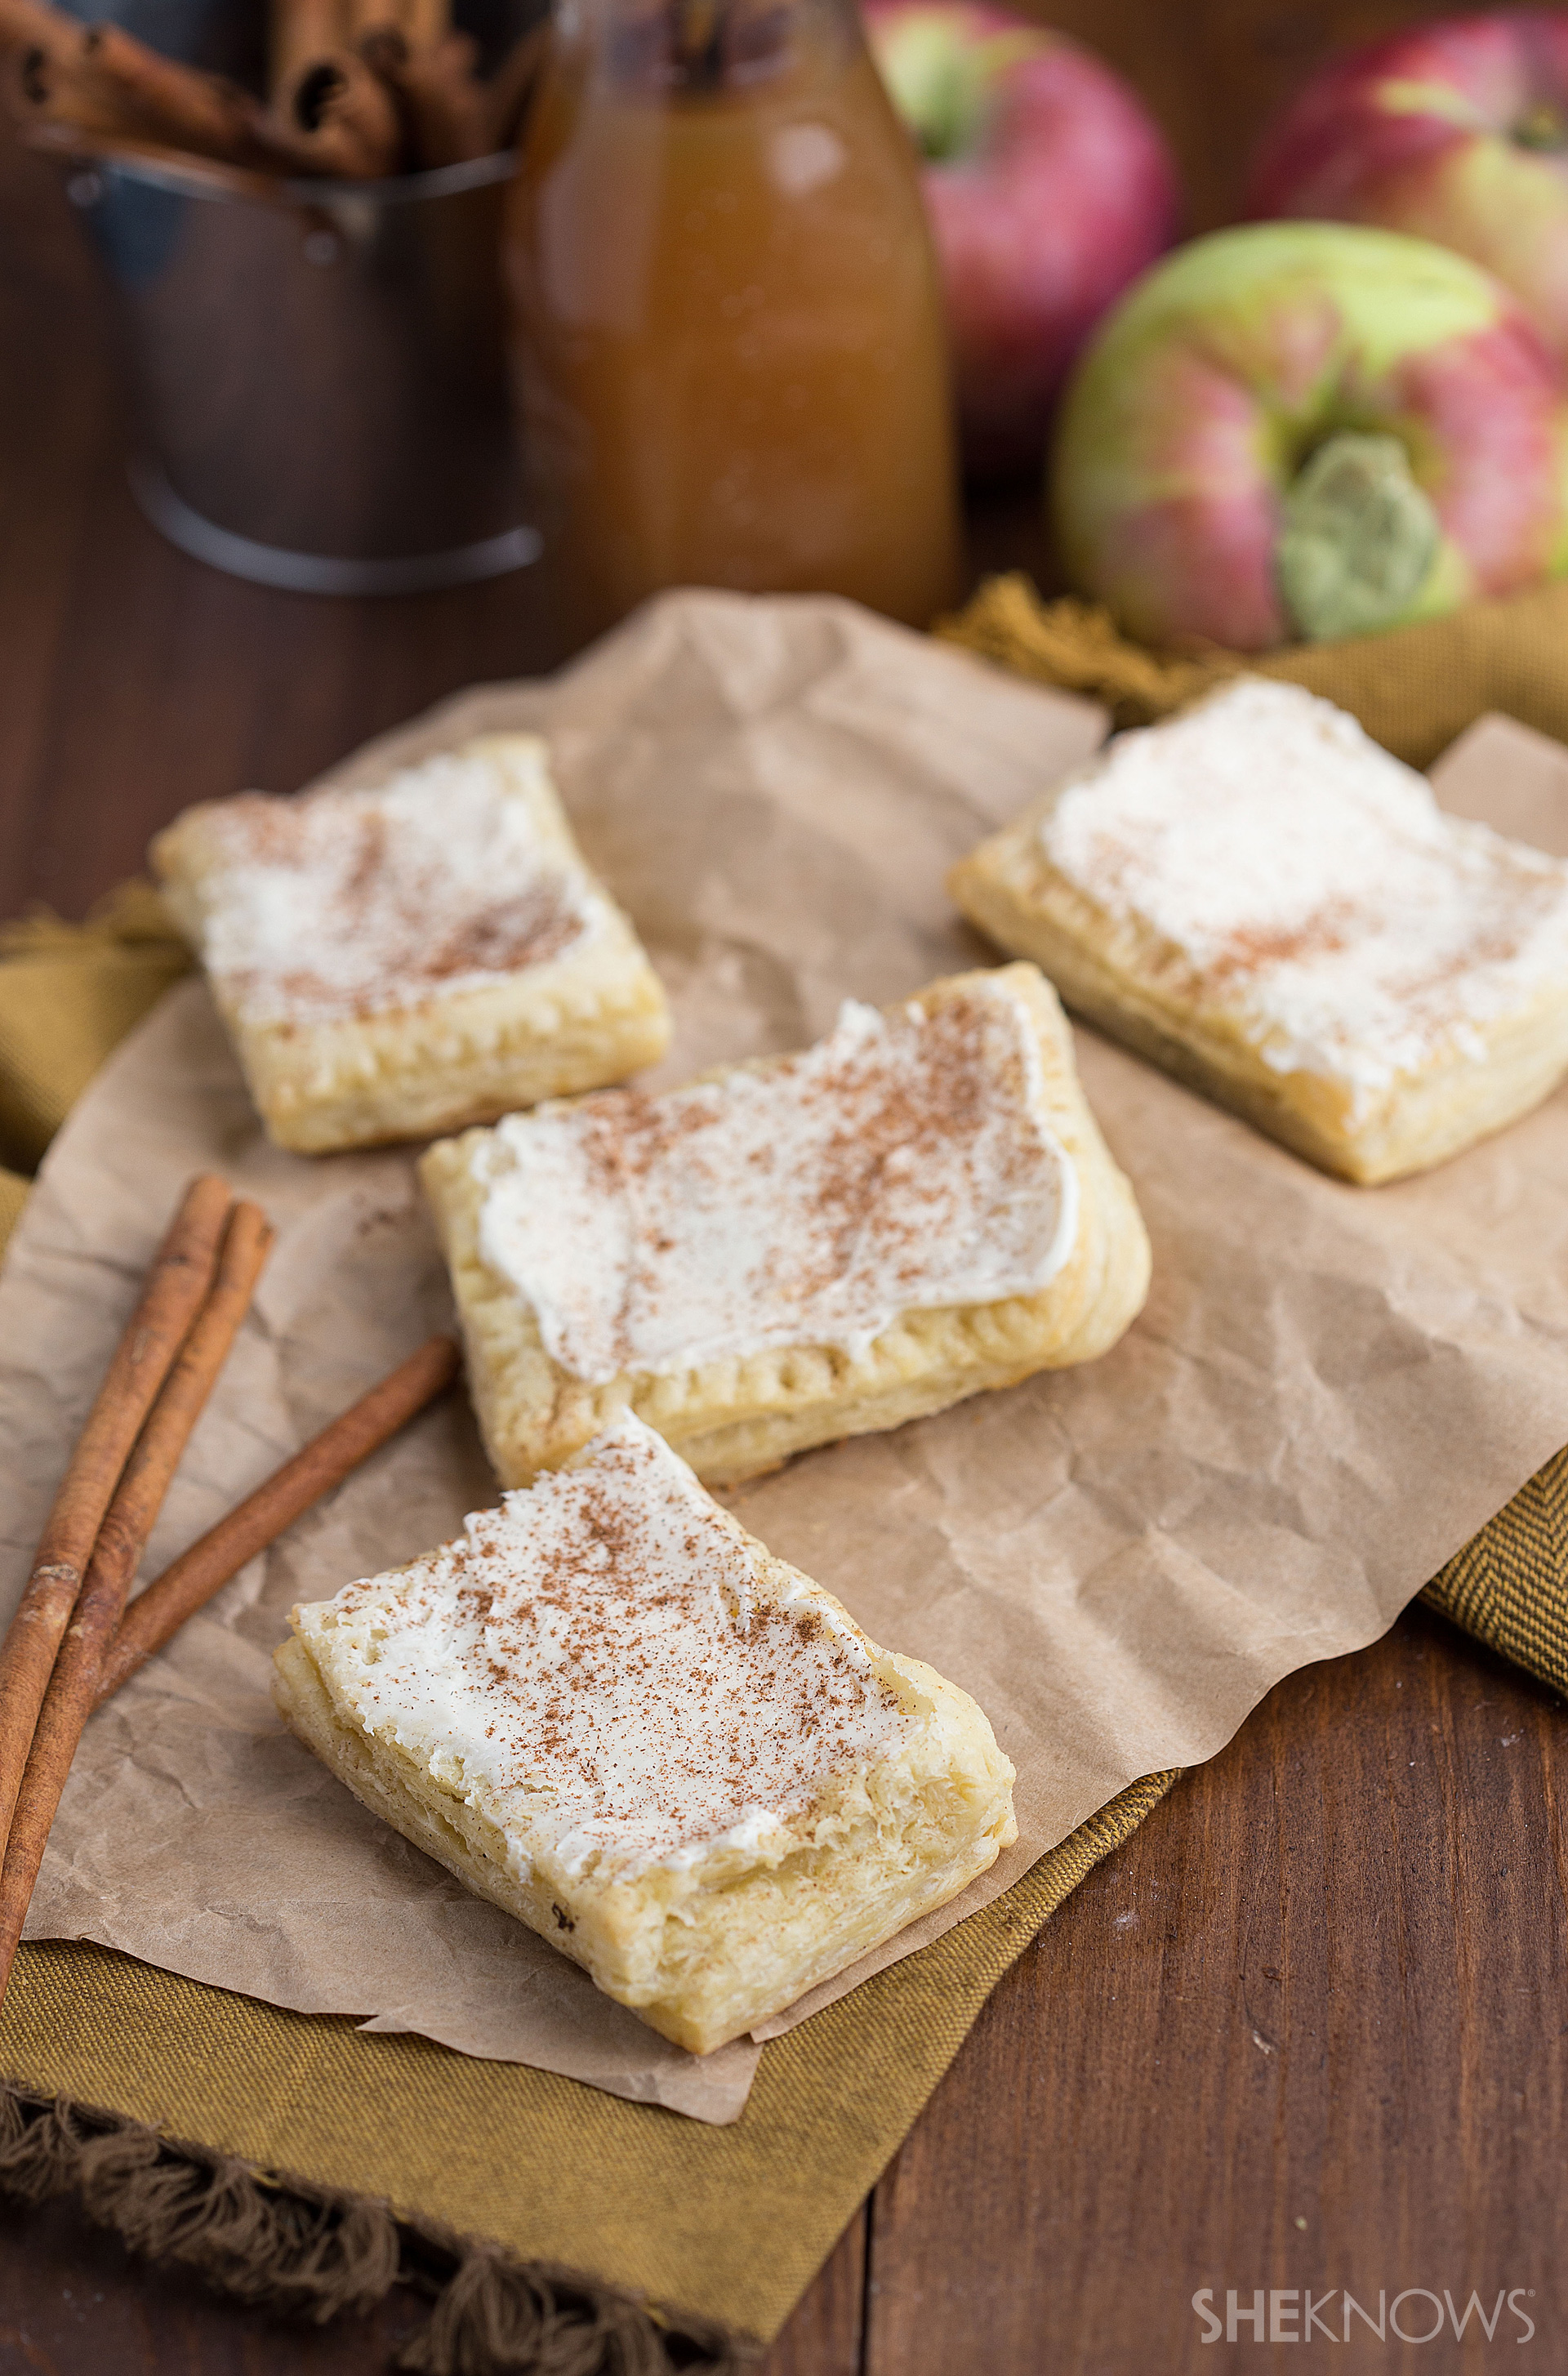 Apple and cream cheese toaster strudel